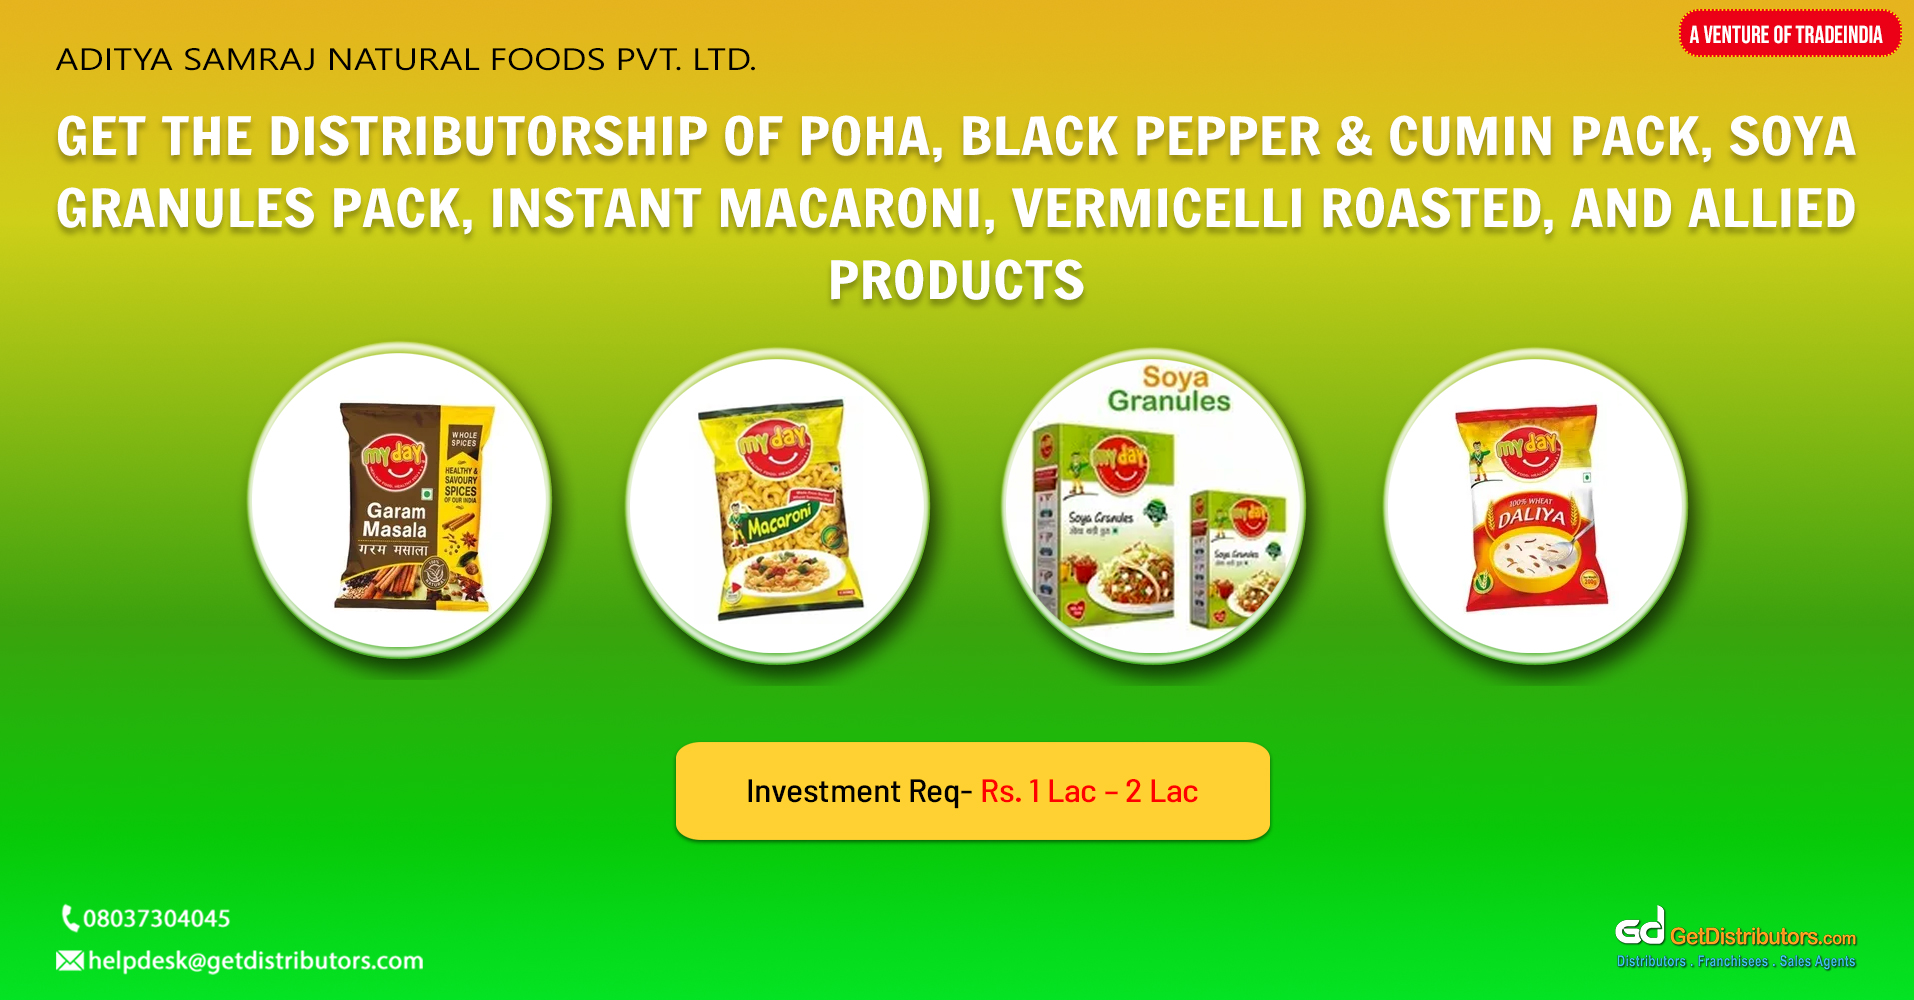 High quality spices and food items at cost effective rates